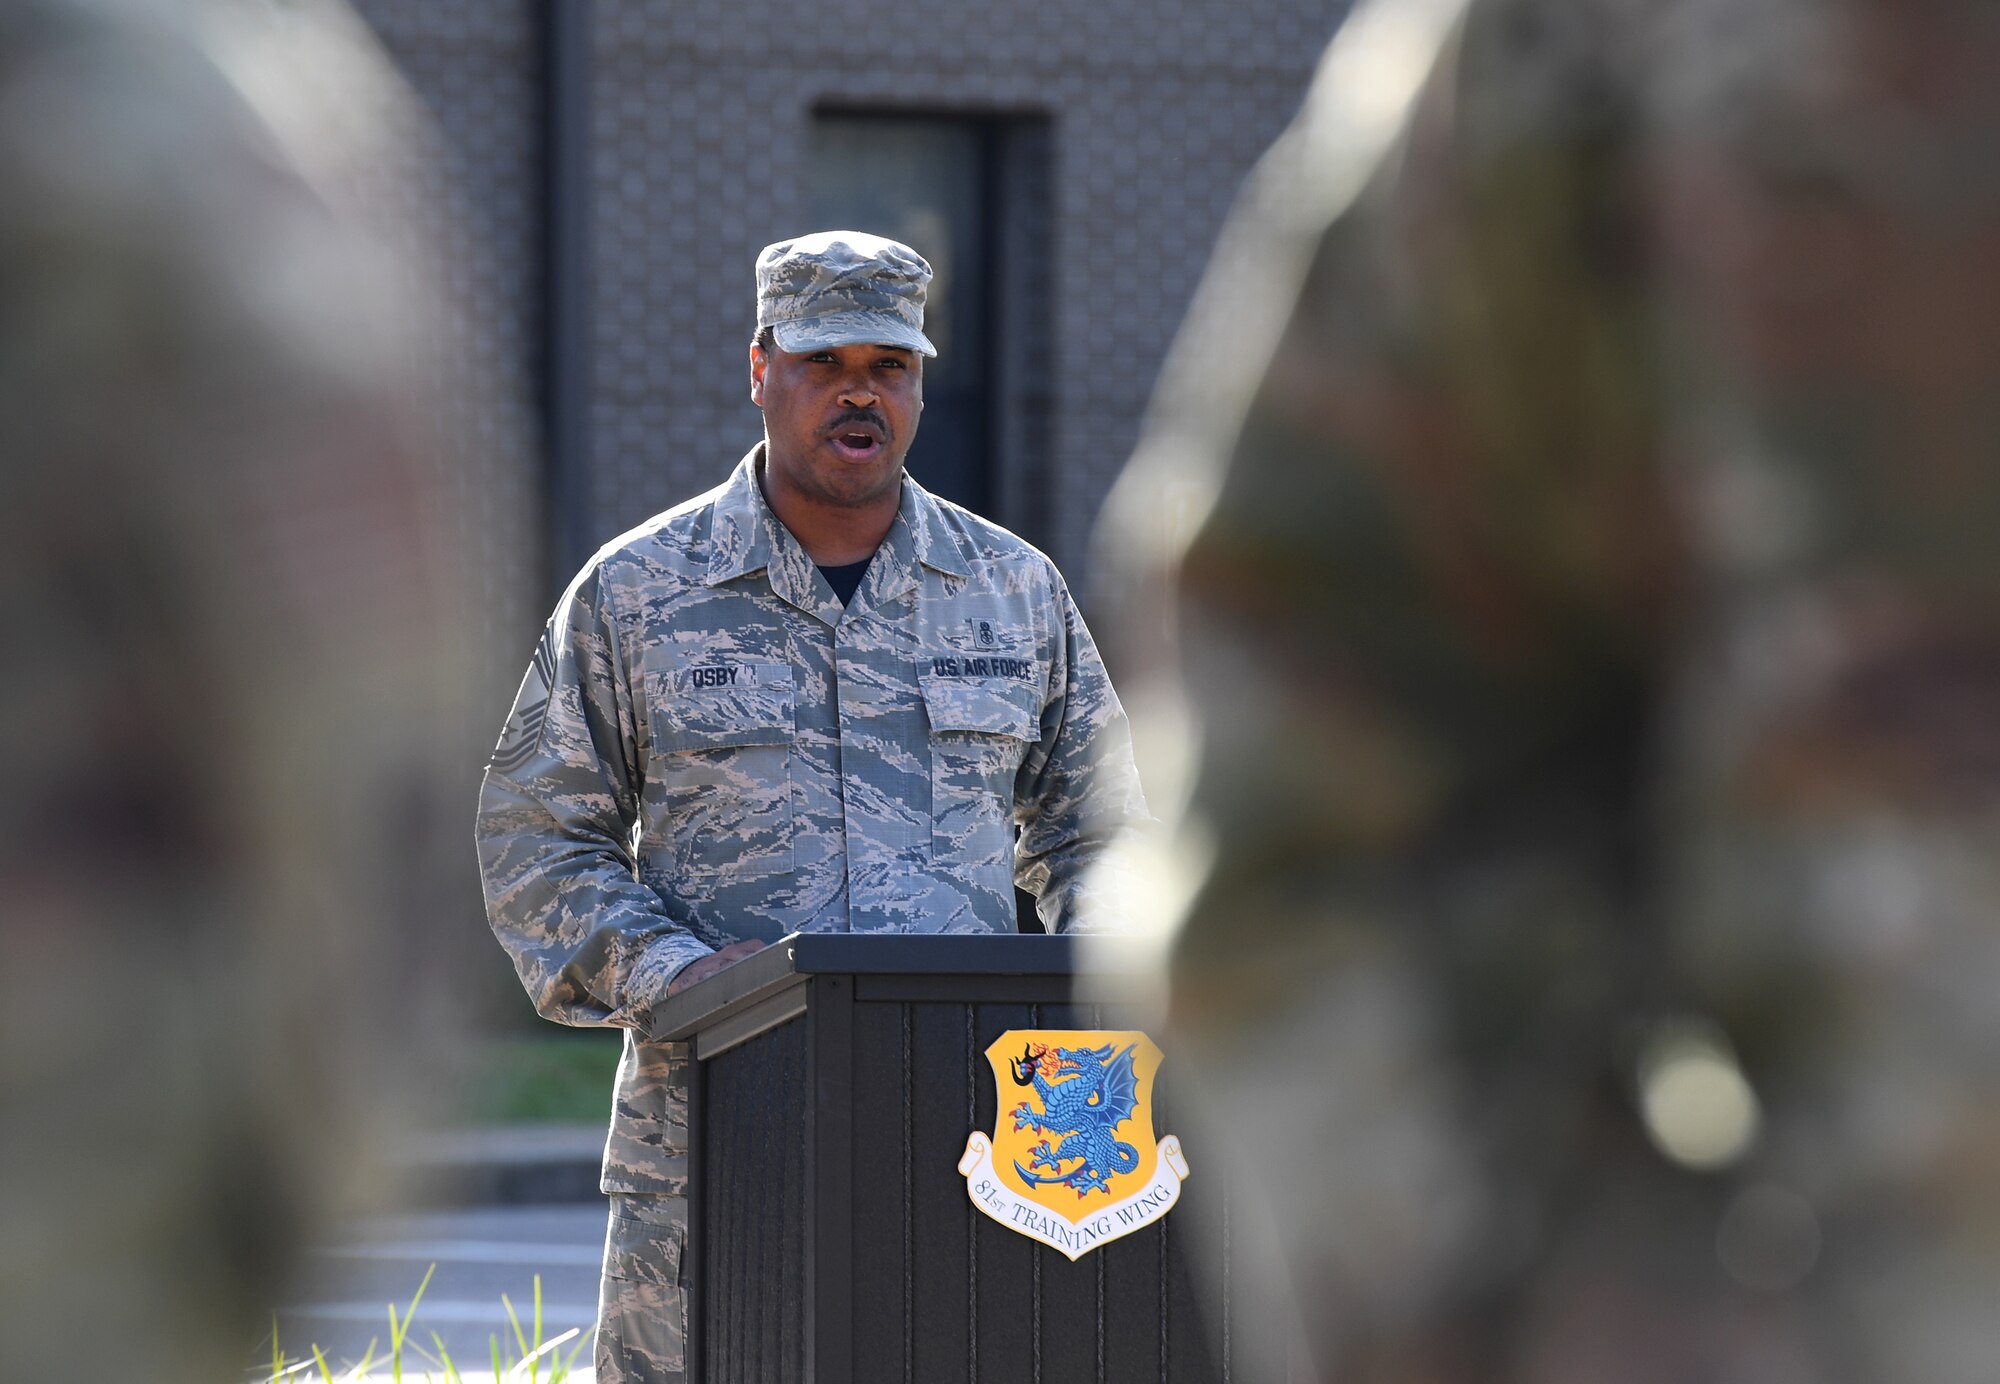 U.S. Air Force Chief Master Sgt. Kevin Osby, 81st Diagnostic and Therapeutics Squadron superintendent, delivers remarks during the POW/MIA retreat ceremony at Keesler Air Force Base, Mississippi, Sept. 20, 2019. The event was held to raise awareness and to pay tribute to all prisoners of war and those military members still missing in action. (U.S. Air Force photo by Kemberly Groue)